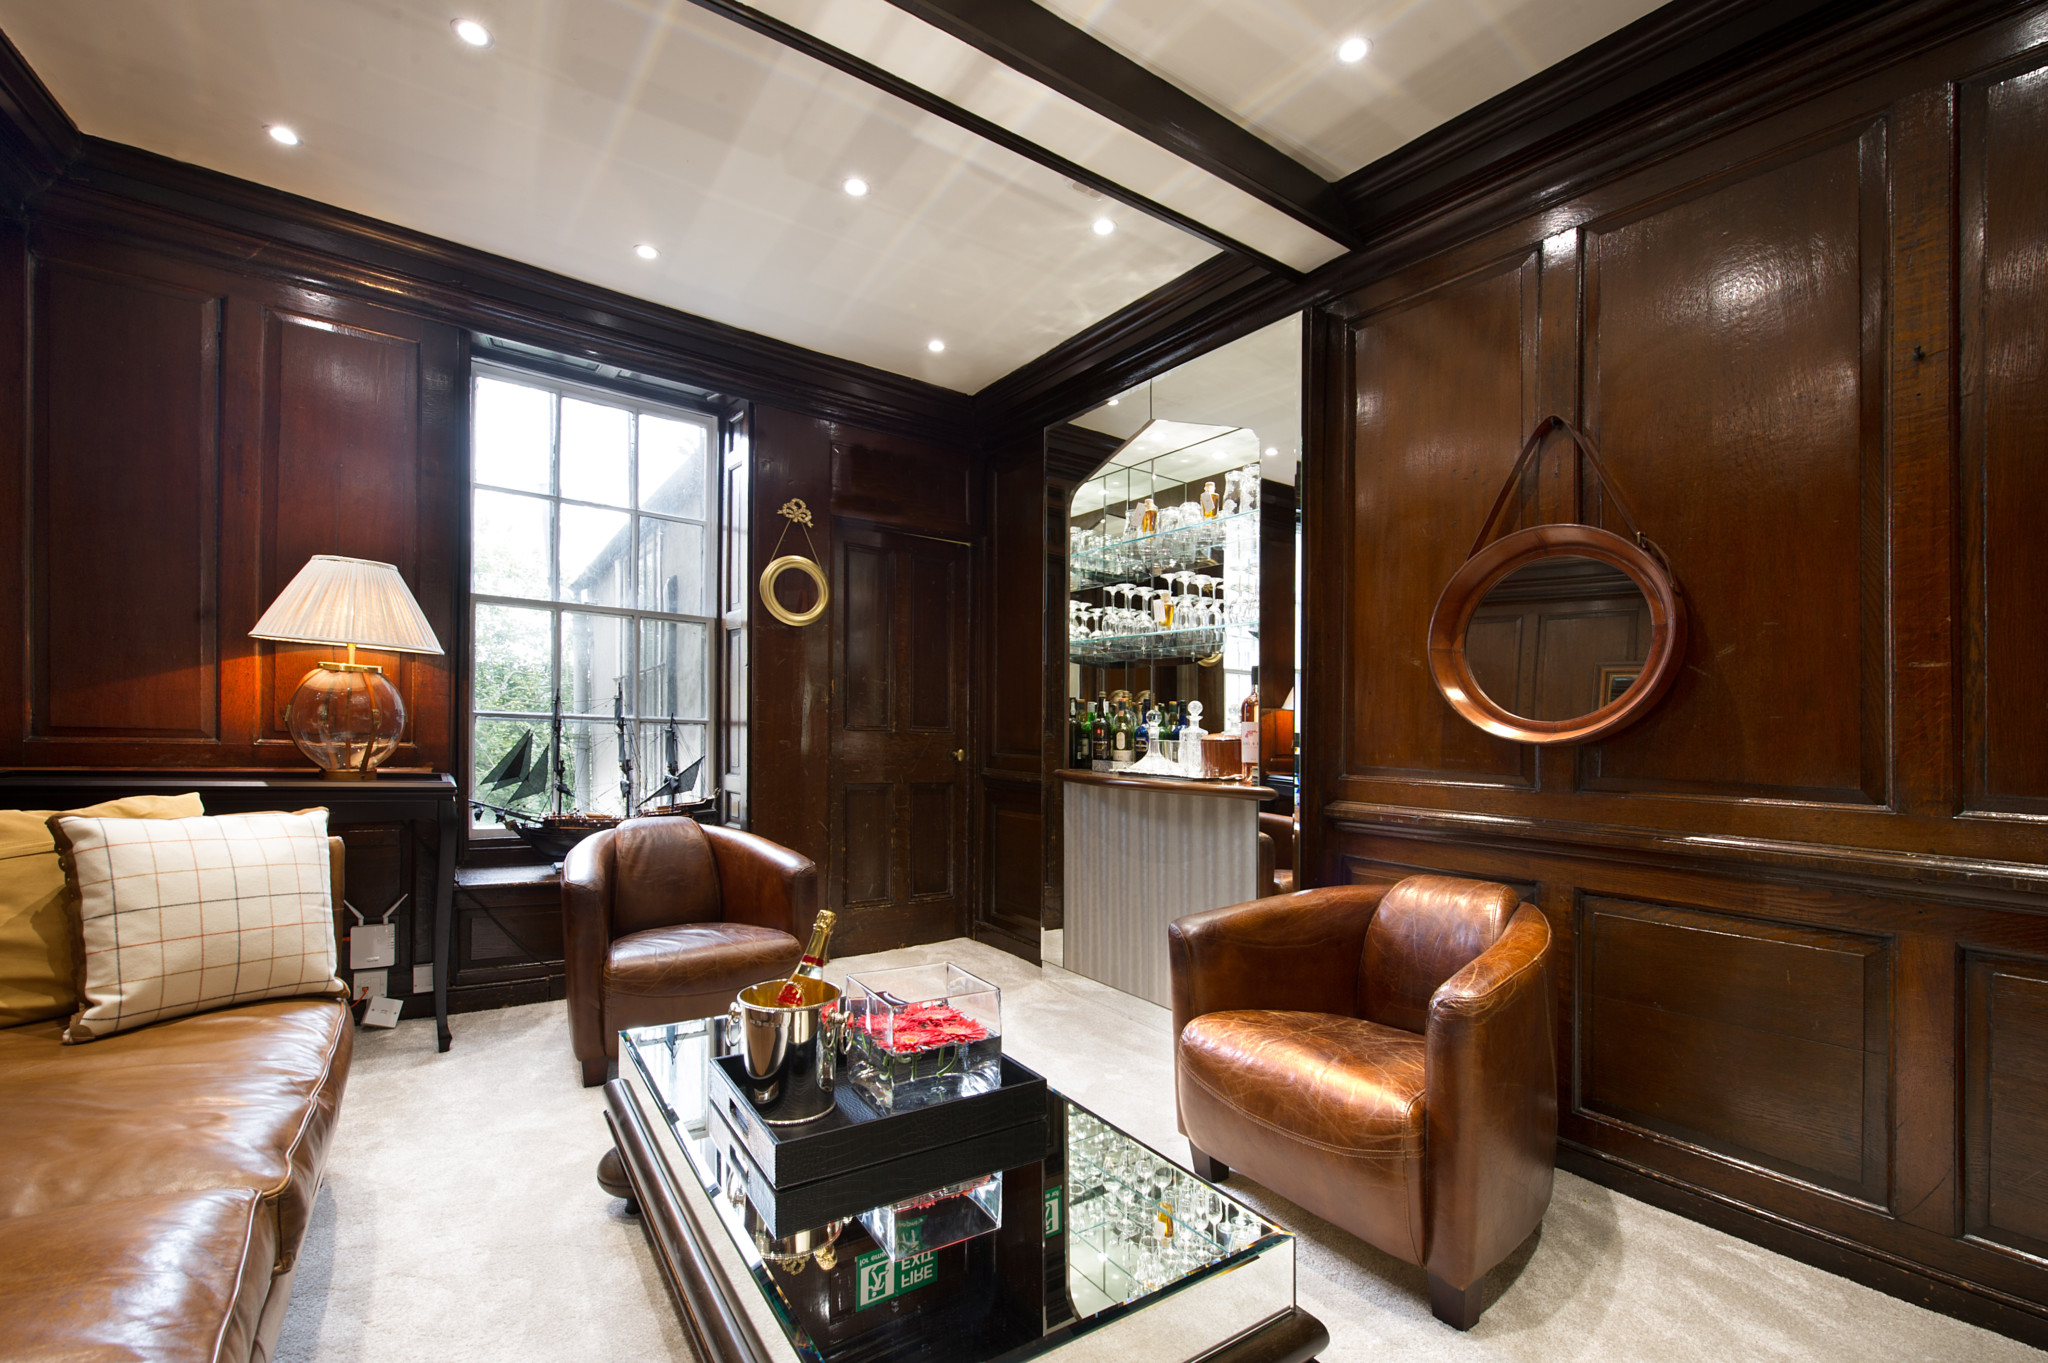 The luxury interior of banks lyon in lancaster.